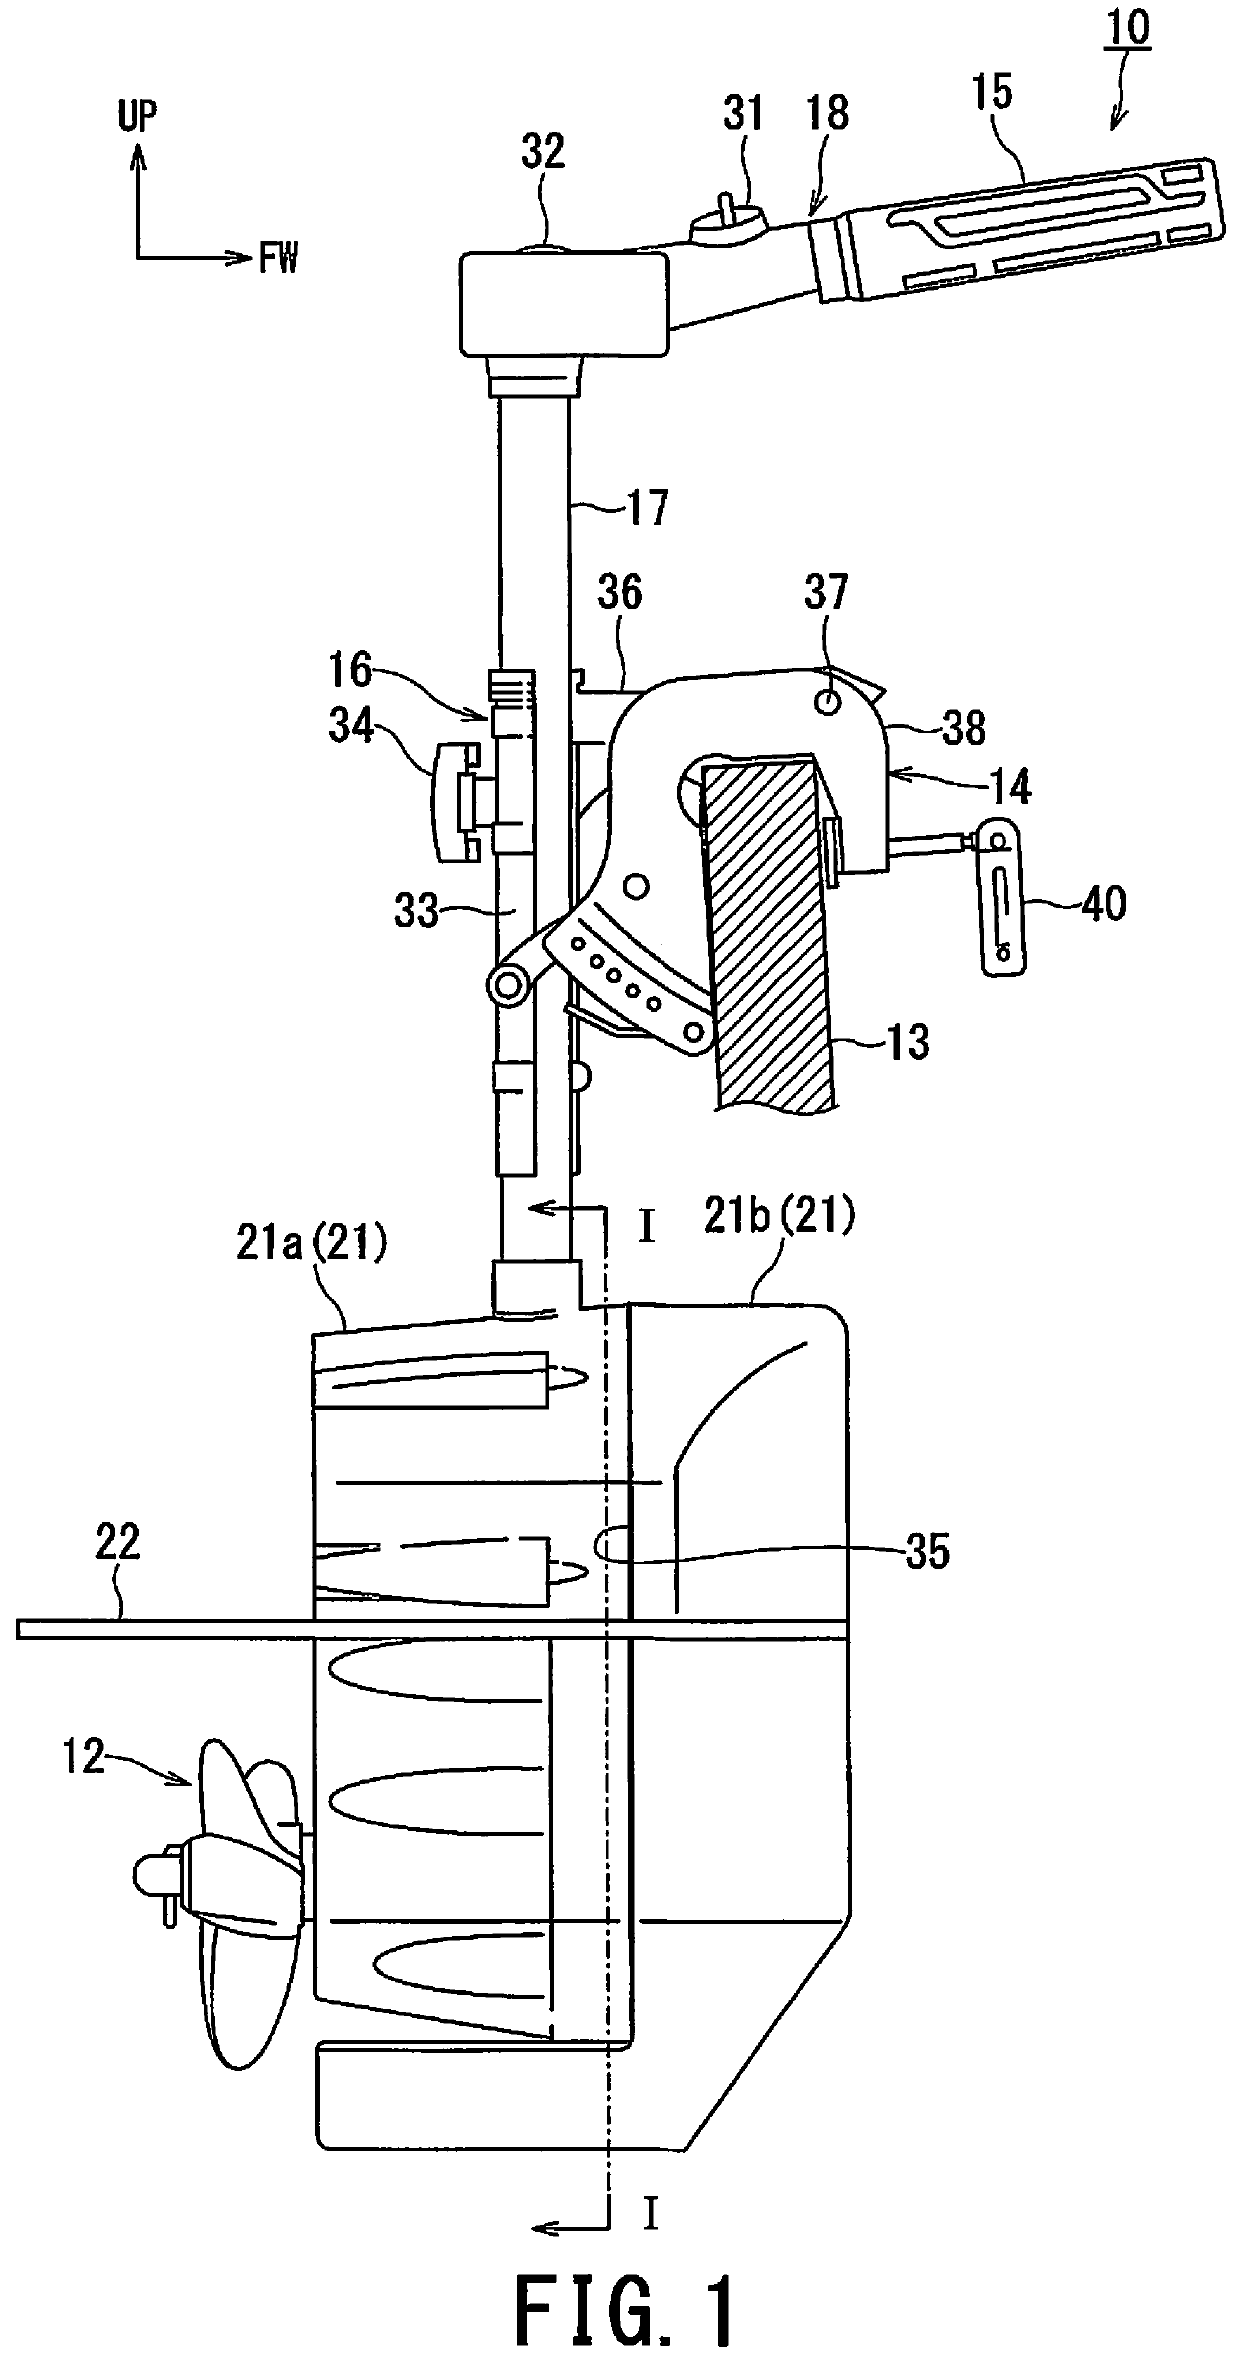 Electric outboard motor